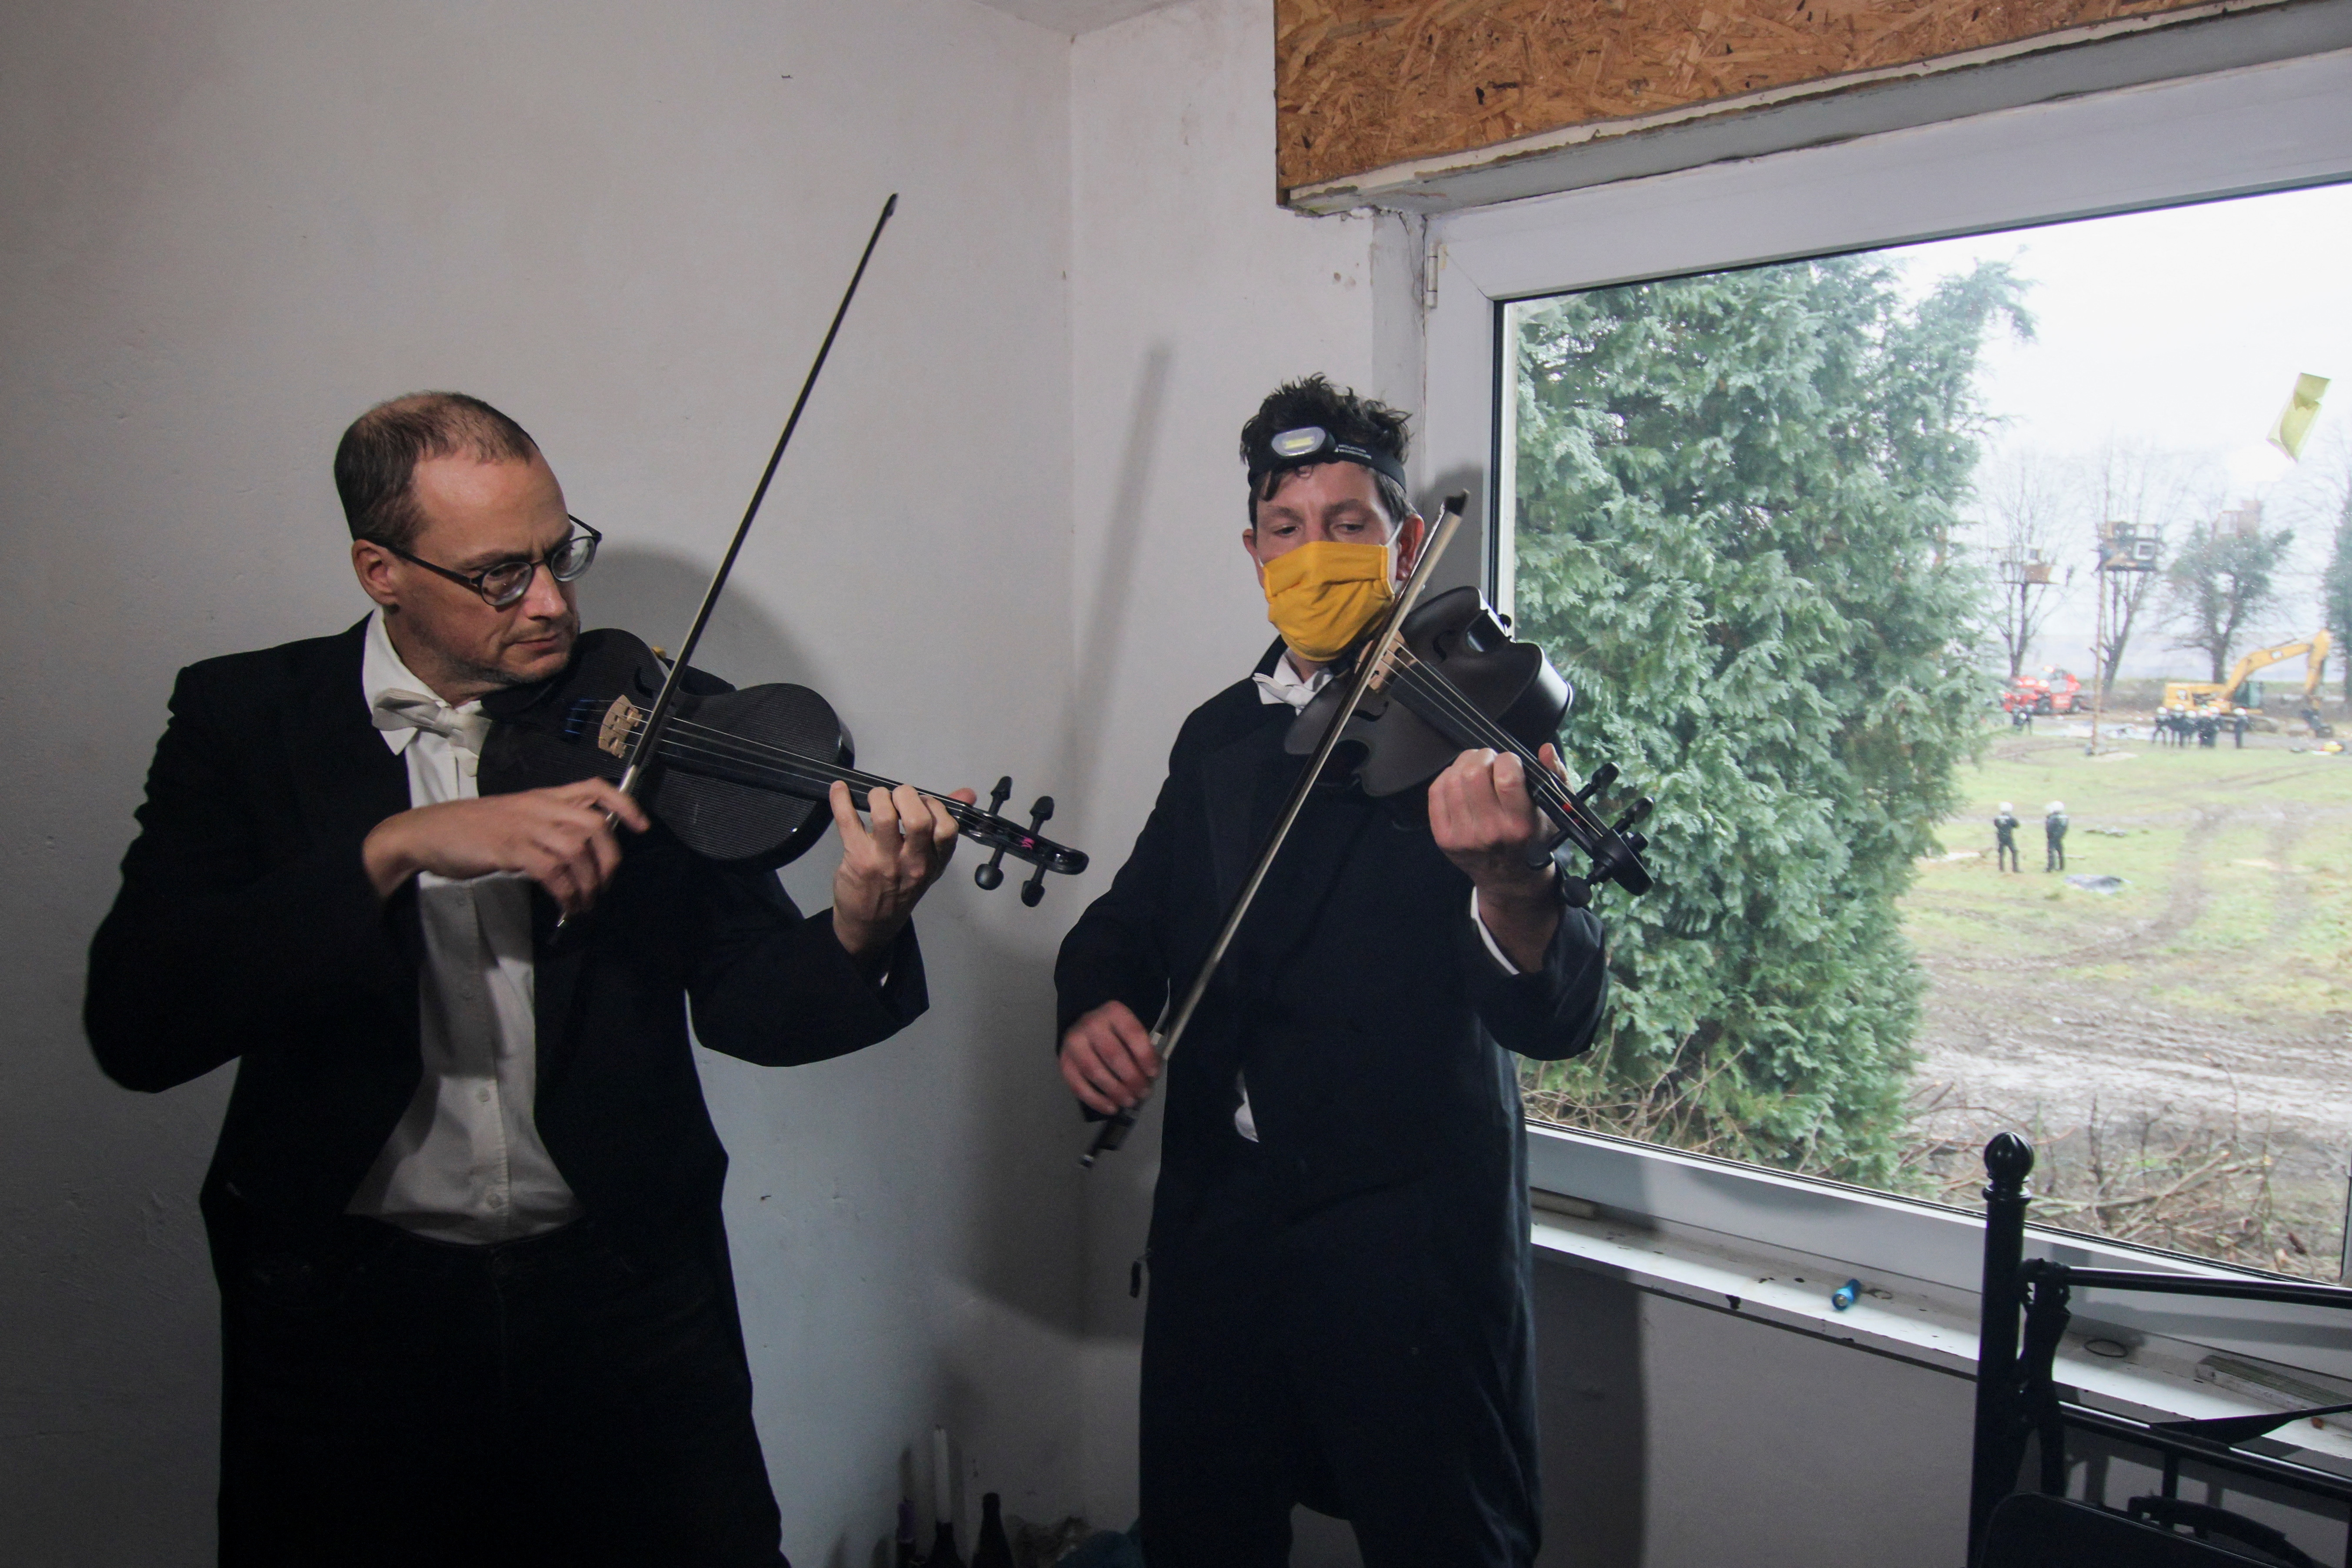 Musicians Thomas Gerlinger and Luppe play violin and viola in an abandoned house in protest against demolishing Luetzerath village to expand the Garzweiler open-cast lignite mine on Thursday. /Wolfgang Rattay/Reuters